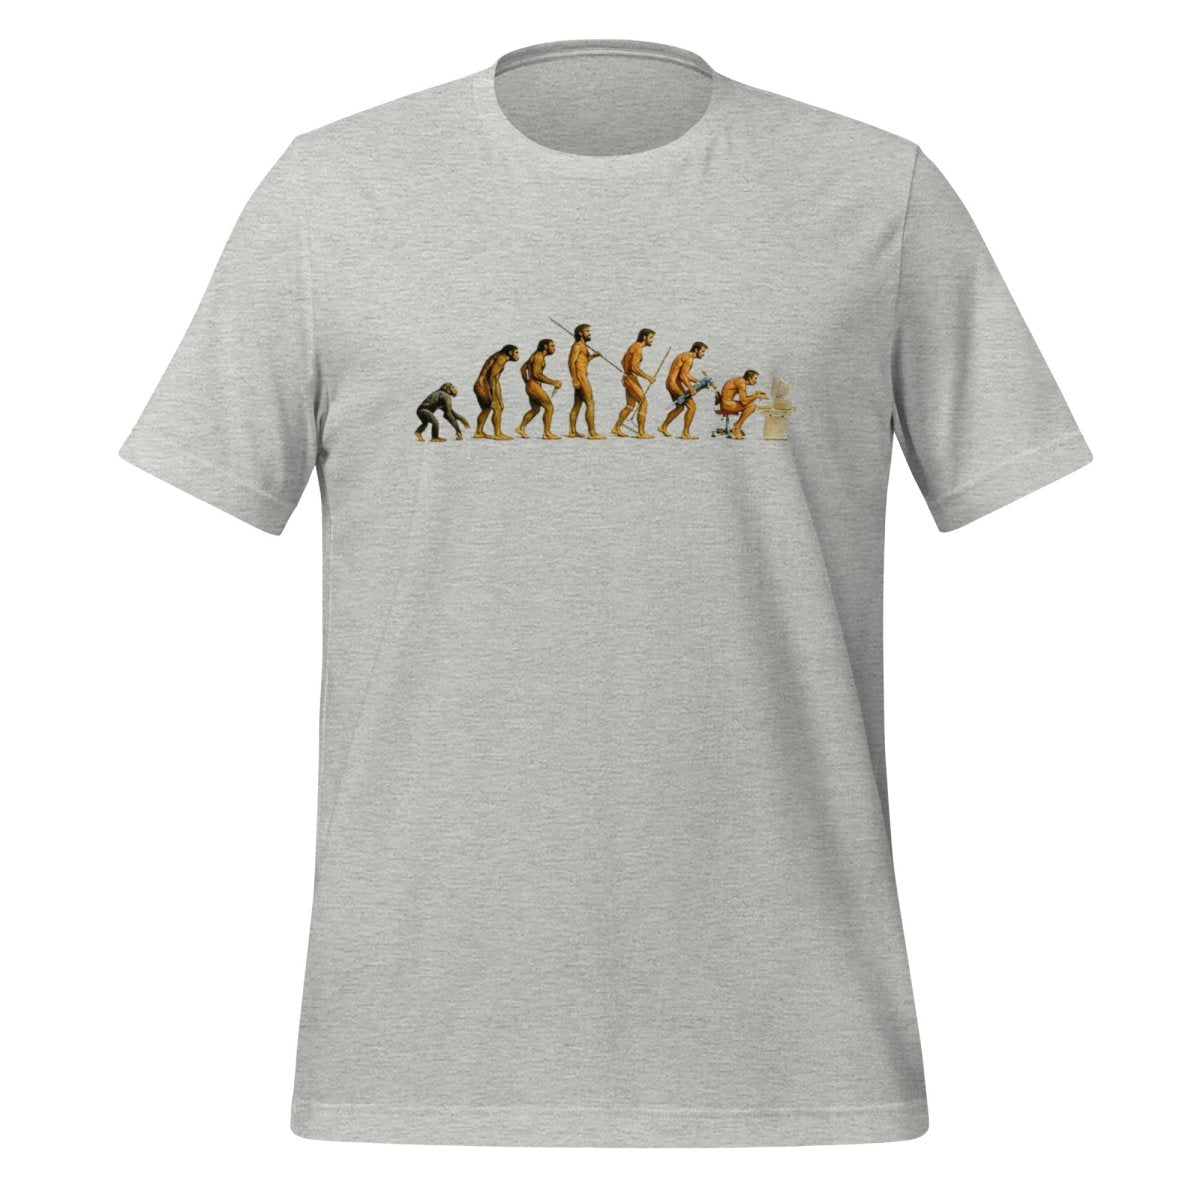 Evolution of the Programmer T - Shirt (unisex) - Athletic Heather - AI Store